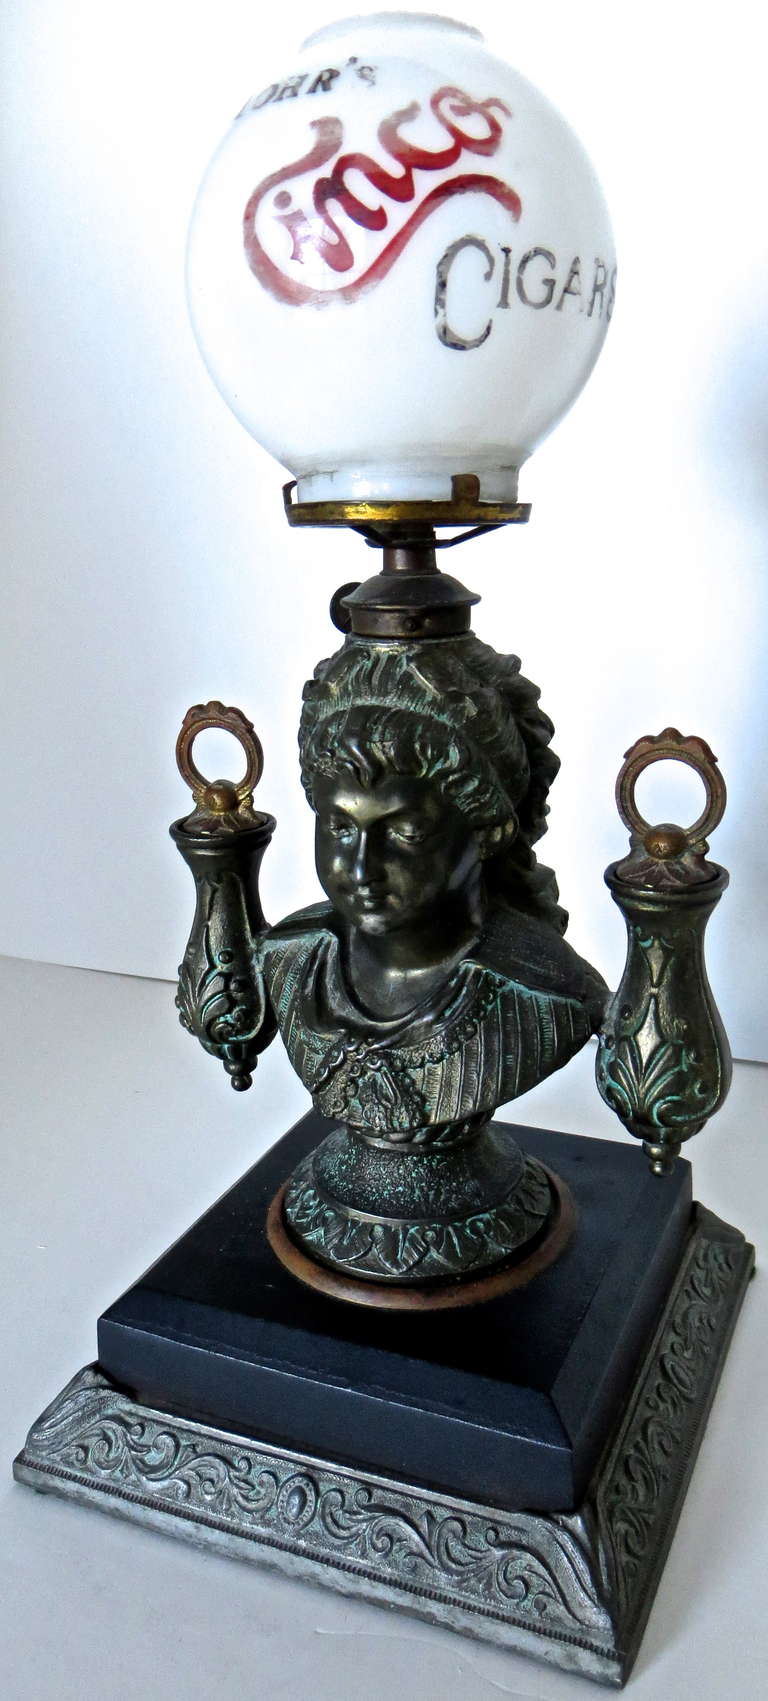 This is a top of the line cast iron gas Cigar Lighter that would have been found in American saloons in the late 19th century. It was manufactured Circa 1880. It is an elaborate and specific to detail sculptor of a beautiful woman with long hair and